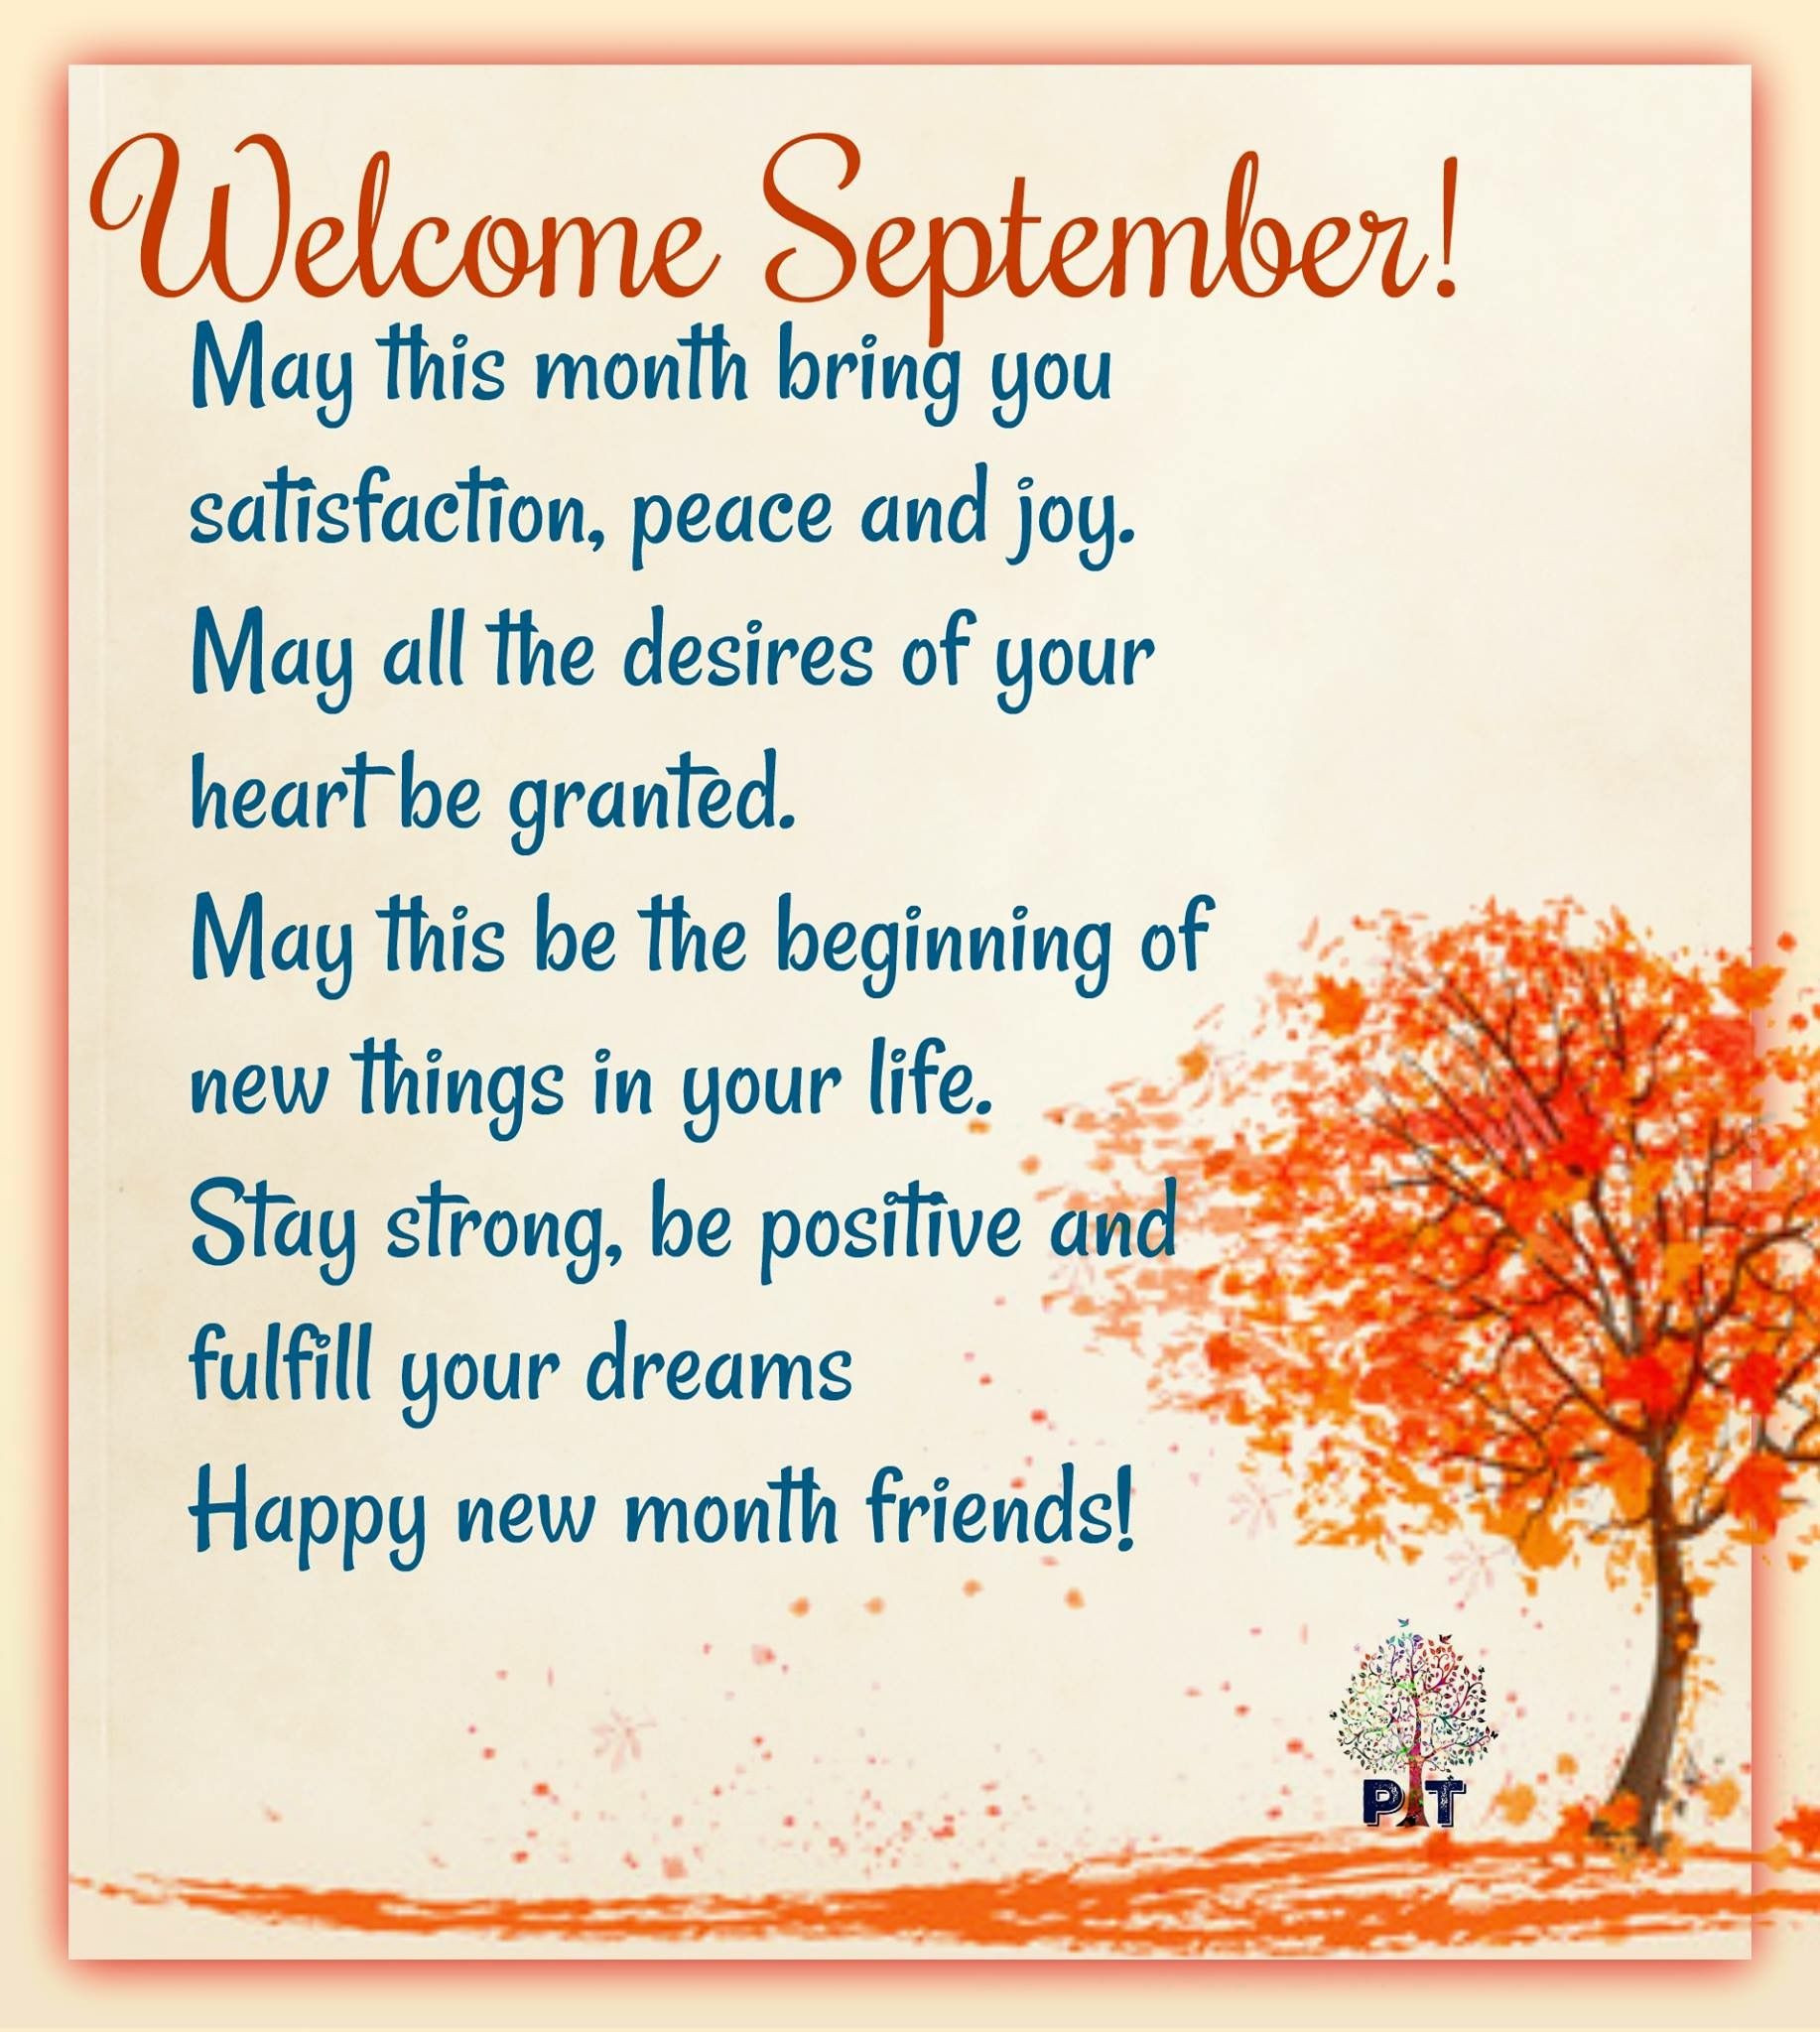 September Quotes Inspirational
 Wel e September Quotes And Sayings